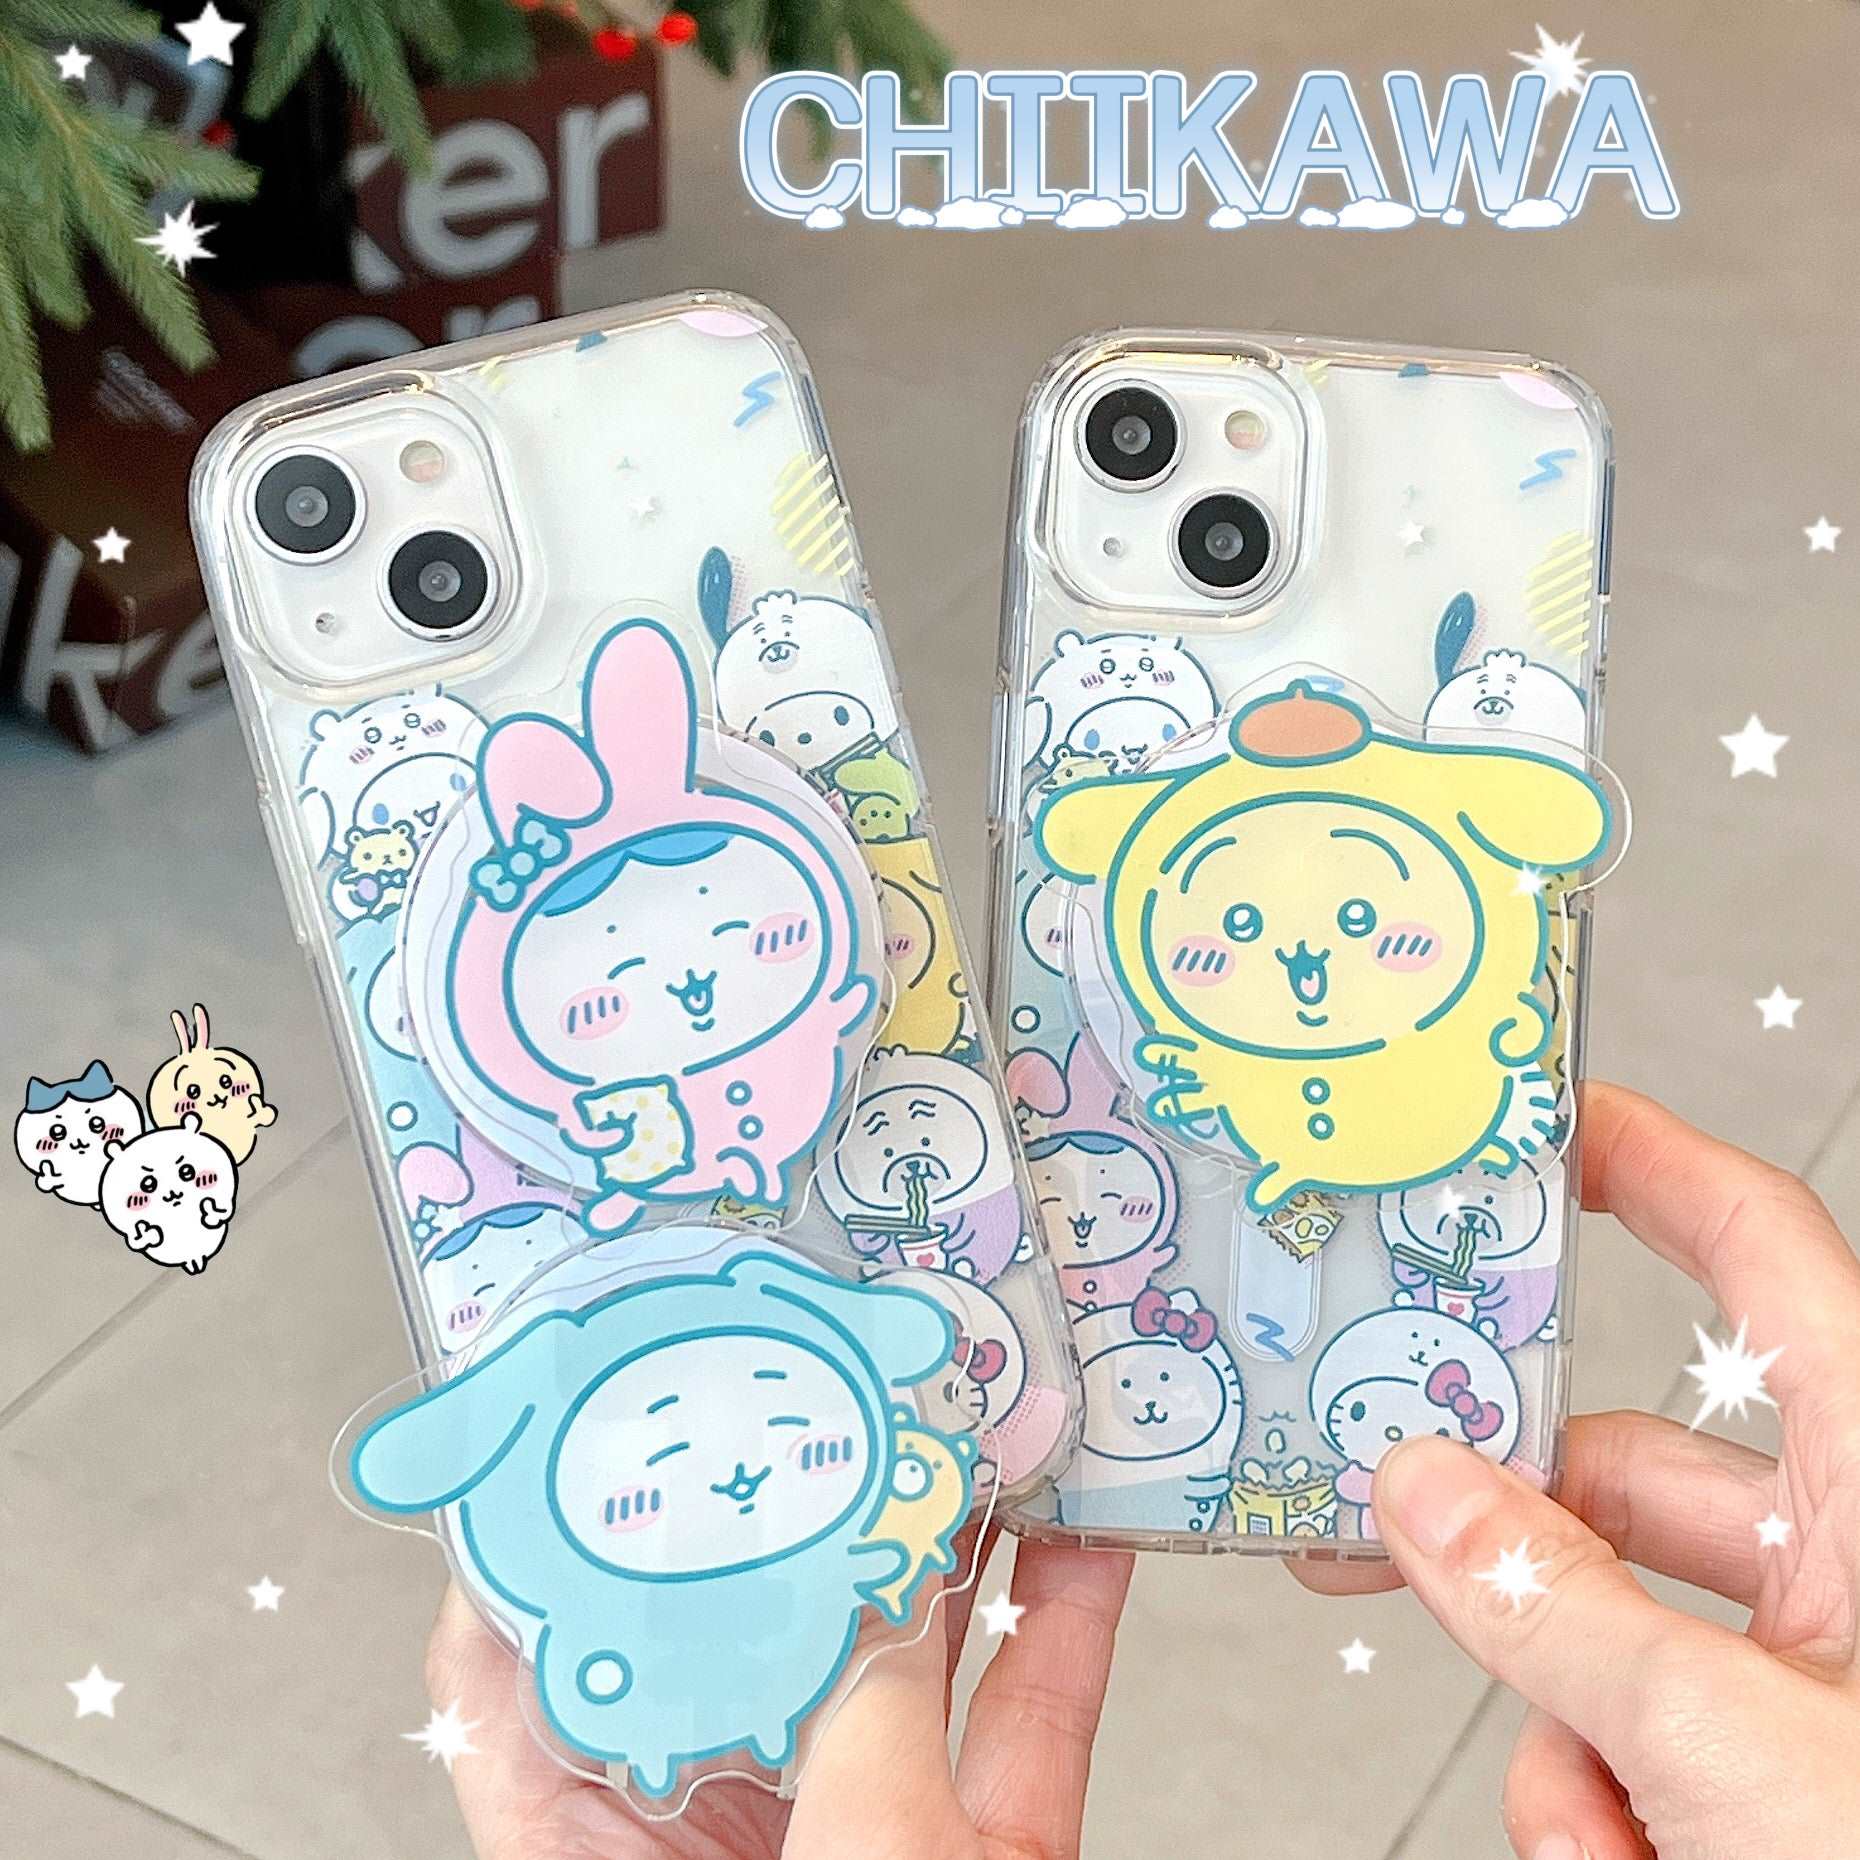 Chiikawa Japanese Style iPhone Case for iPhone 11-15 Pro Max, Magnetic Phone Case With Phone Holder for Anime Lovers, Cute Phone Case for Women Girls, Y2K Fashion Item for Gen Z